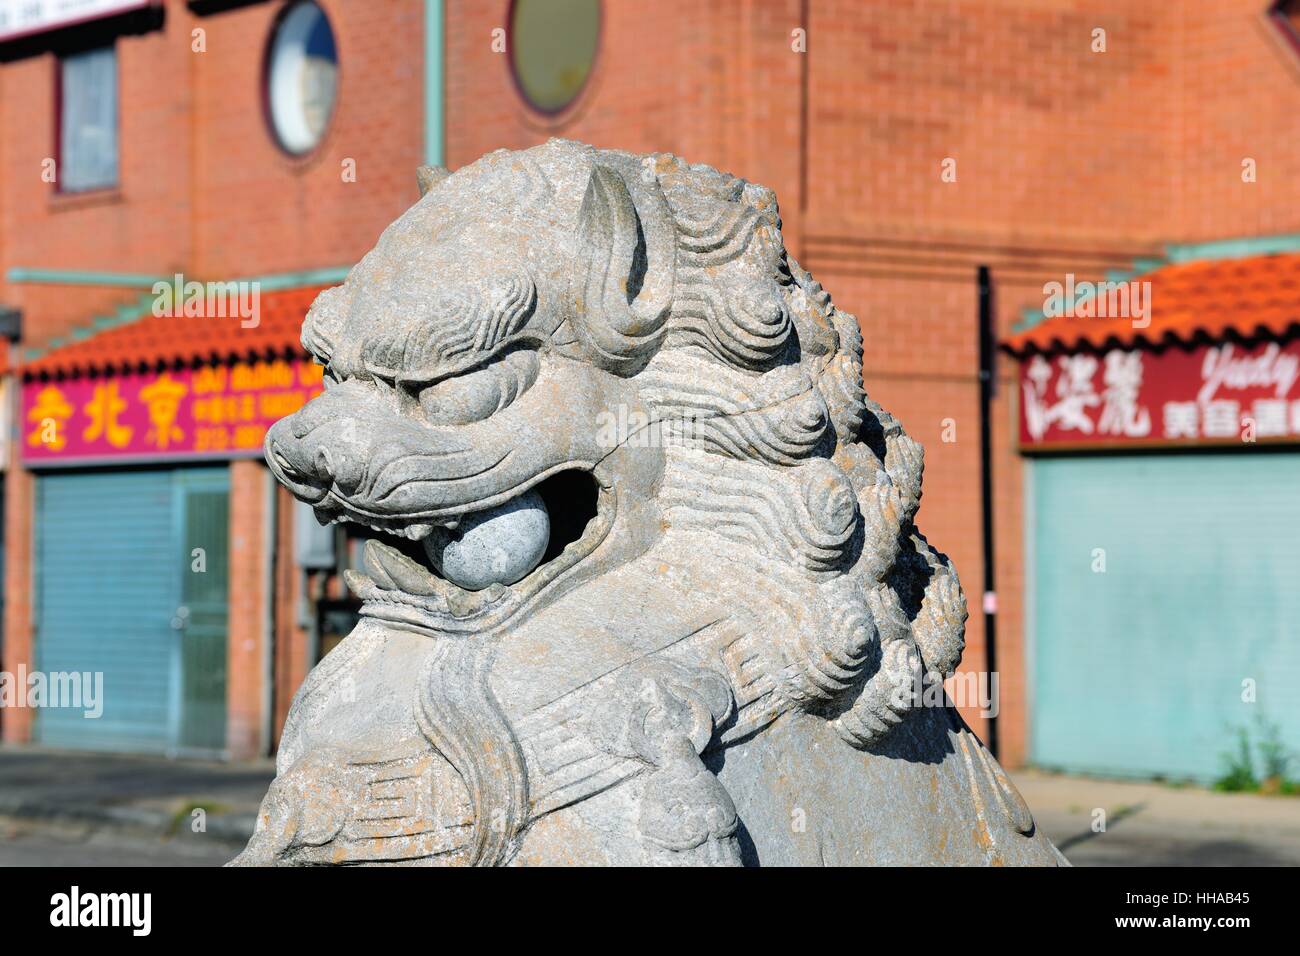 A Chinese guardian lion in Chicago's Chinatown reflects the local cultural influence. Statues of guardian lions. Chicago, Illinois, USA. Stock Photo